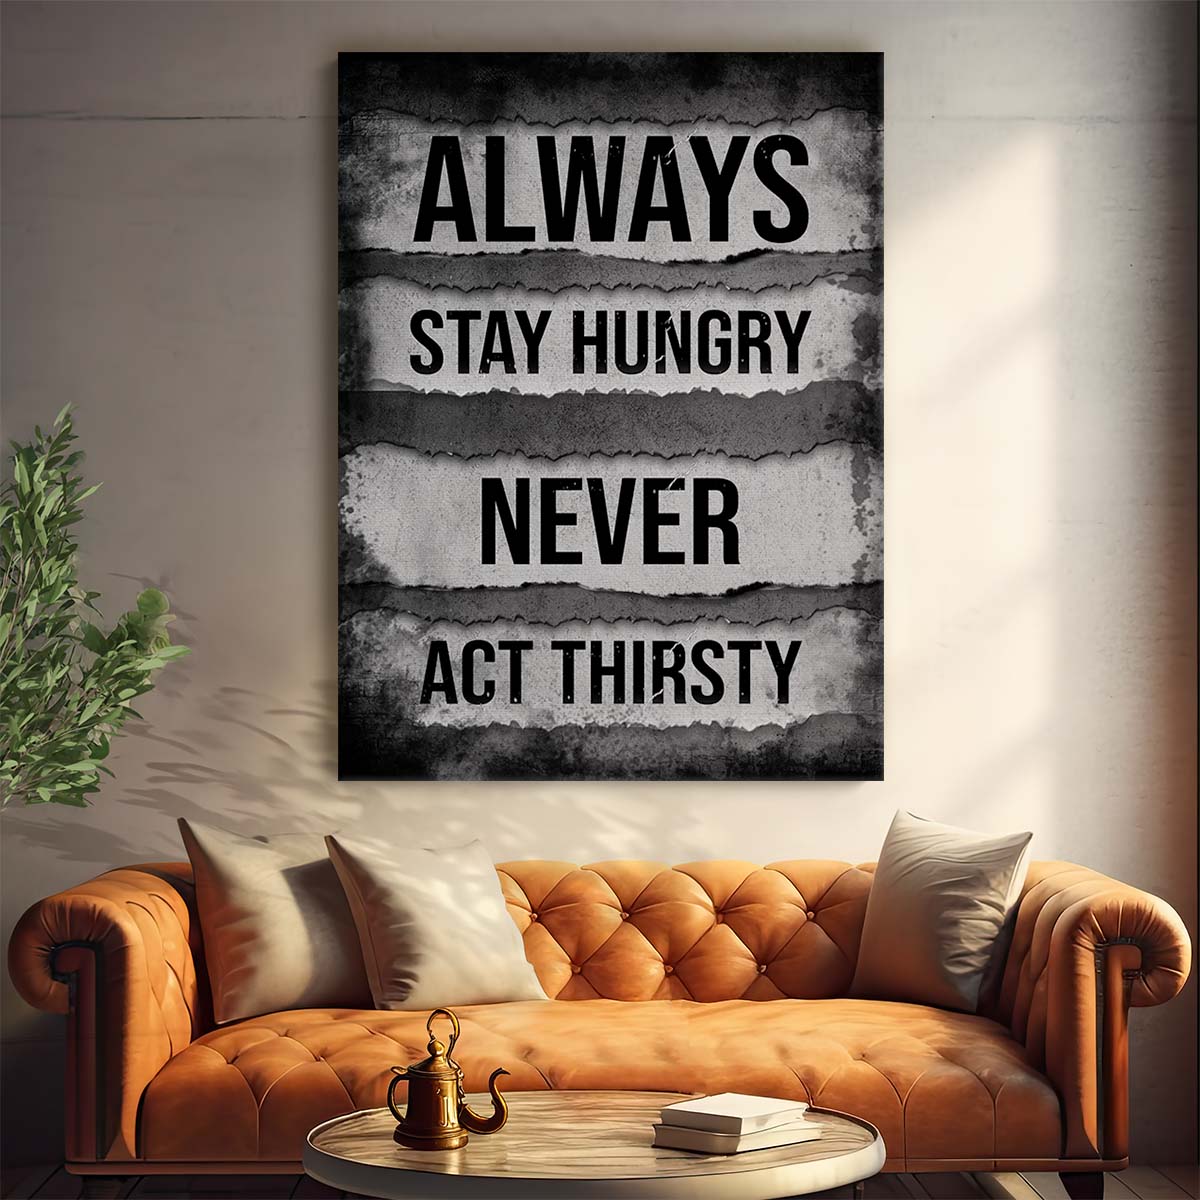 Always Stay Hungry Never Act Thirsty Wall Art by Luxuriance Designs. Made in USA.